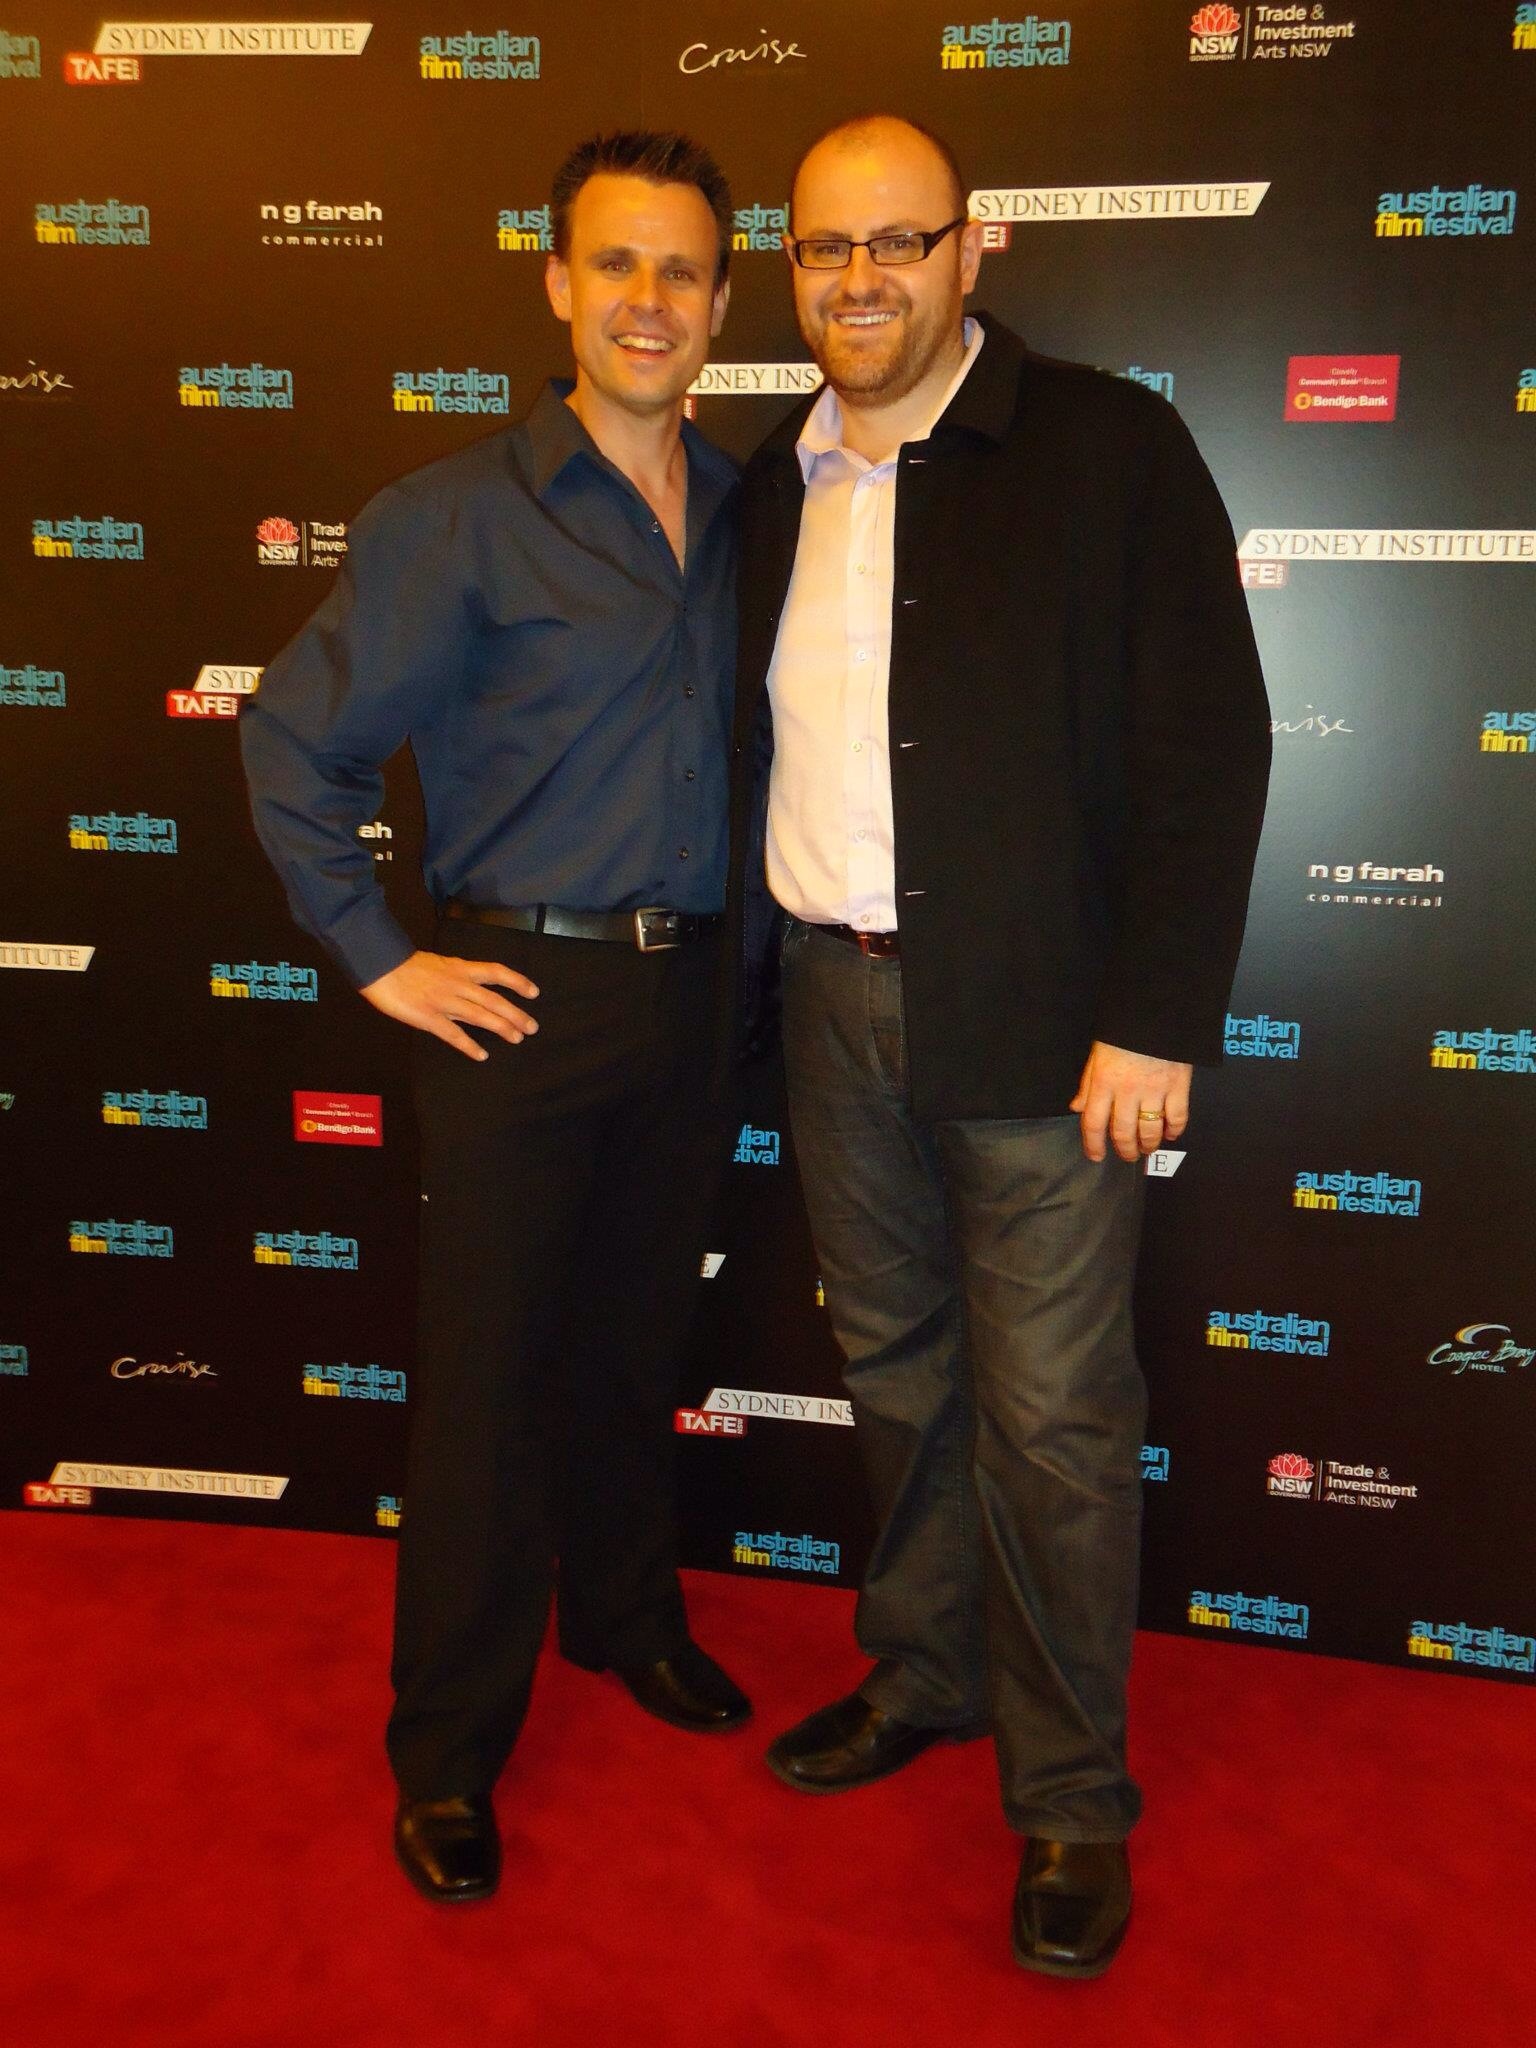 Director/ Producer Lincoln Fenner with Producer Richard Attieh at the Opening Night of the Australian Film Festival in Sydney.